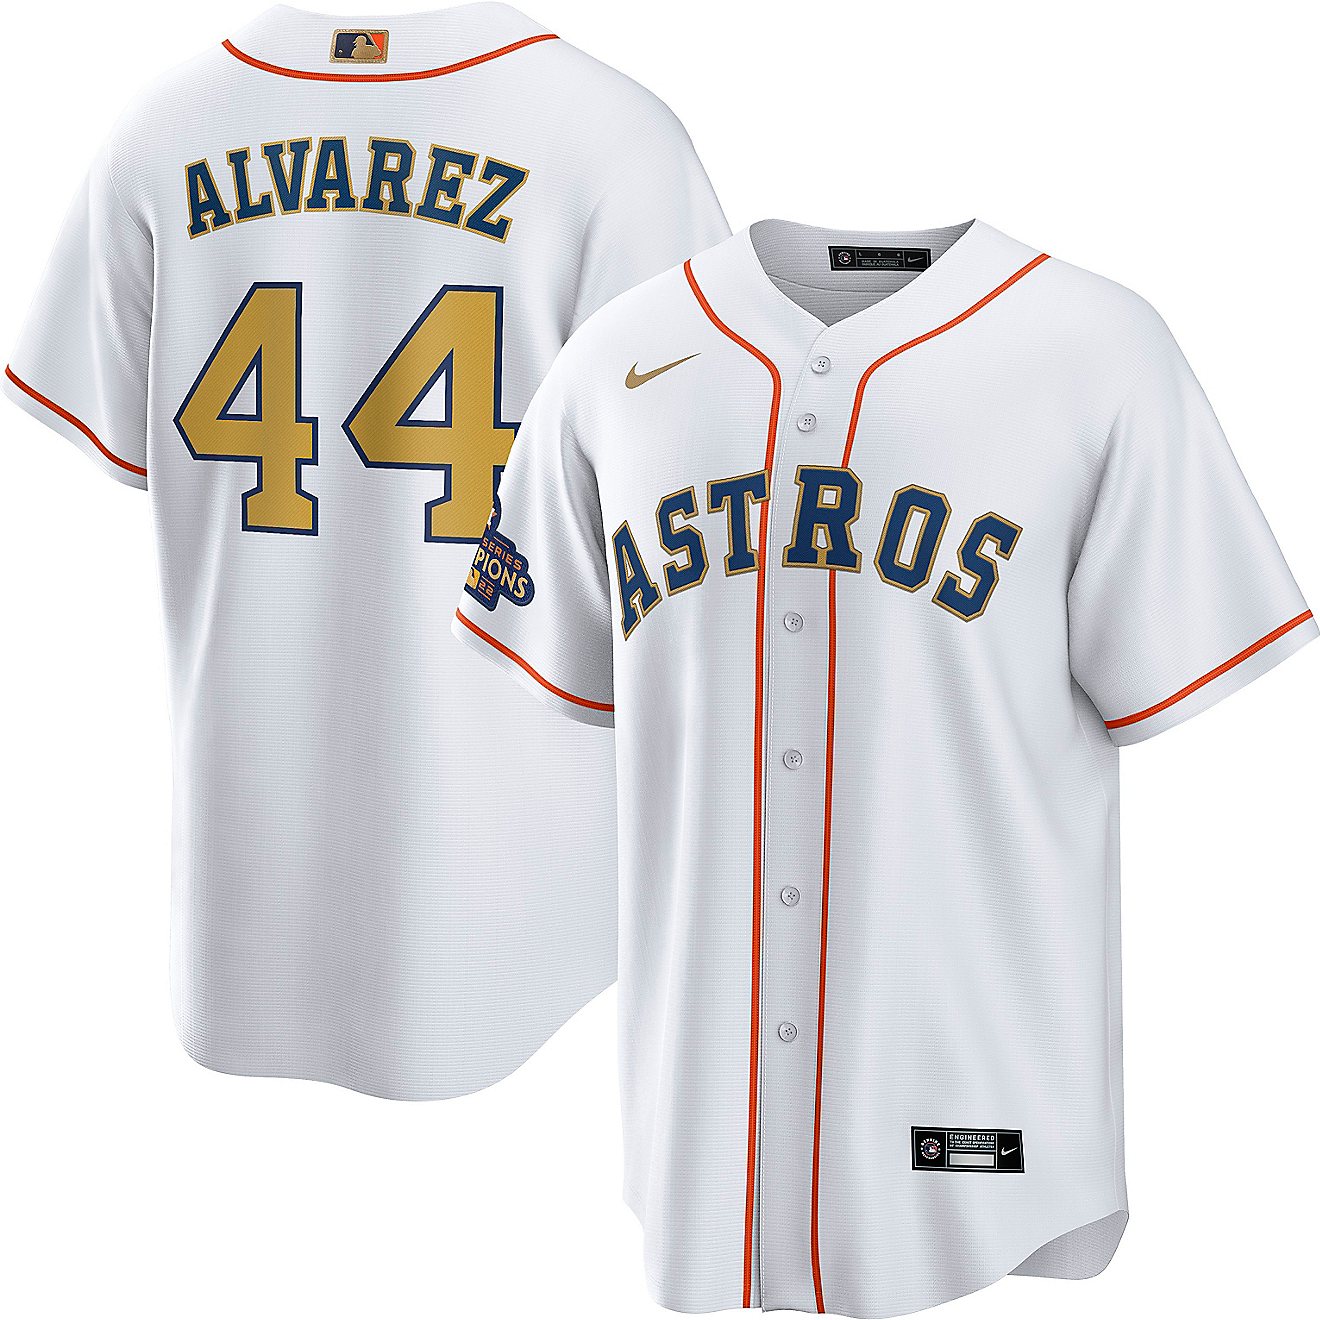 academy sports and outdoors astros jersey